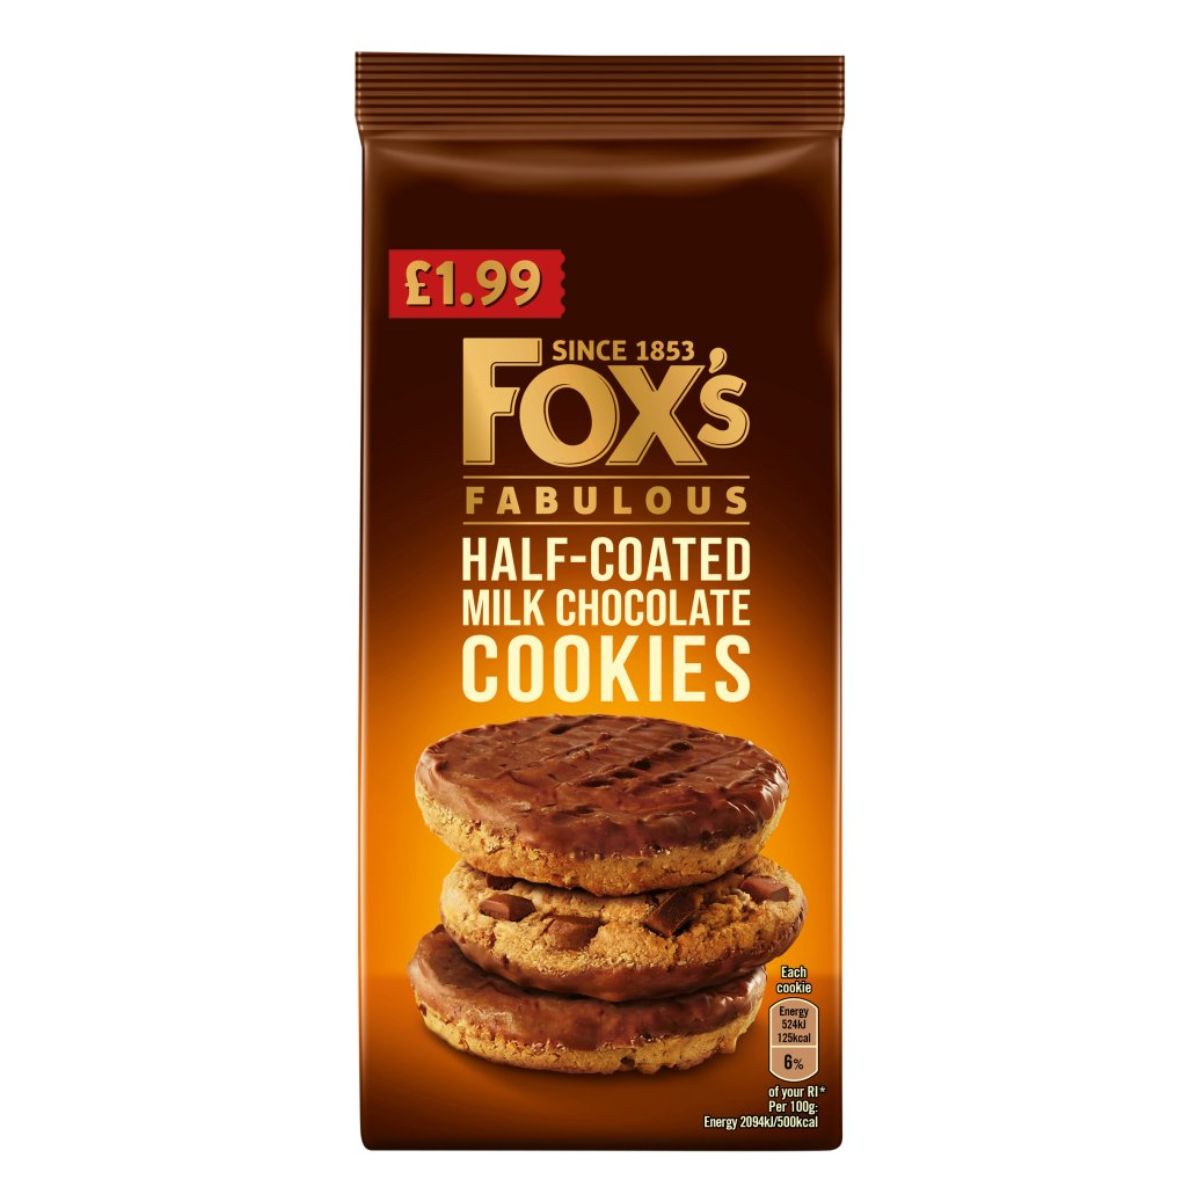 Foxs - Fabulous Half-Coated Milk Chocolate Cookies - 175g are delicious.